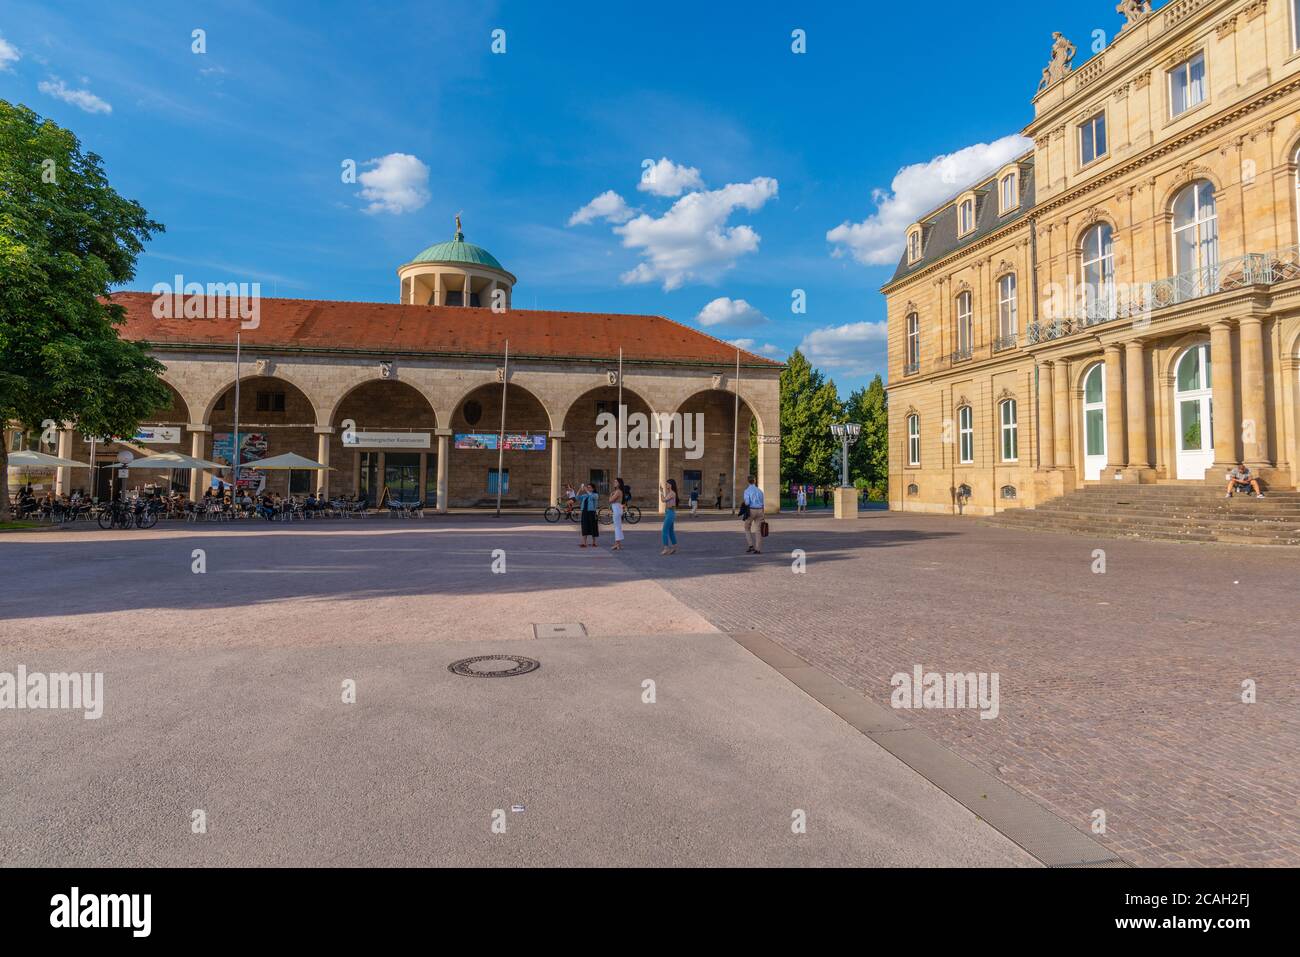 Arthall with cupola (l) and City Palace (r) at Schlossplatz or Palace Square  in the city centre, Stuttgart, Baden-Württemberg, Germany, Europe Stock Photo